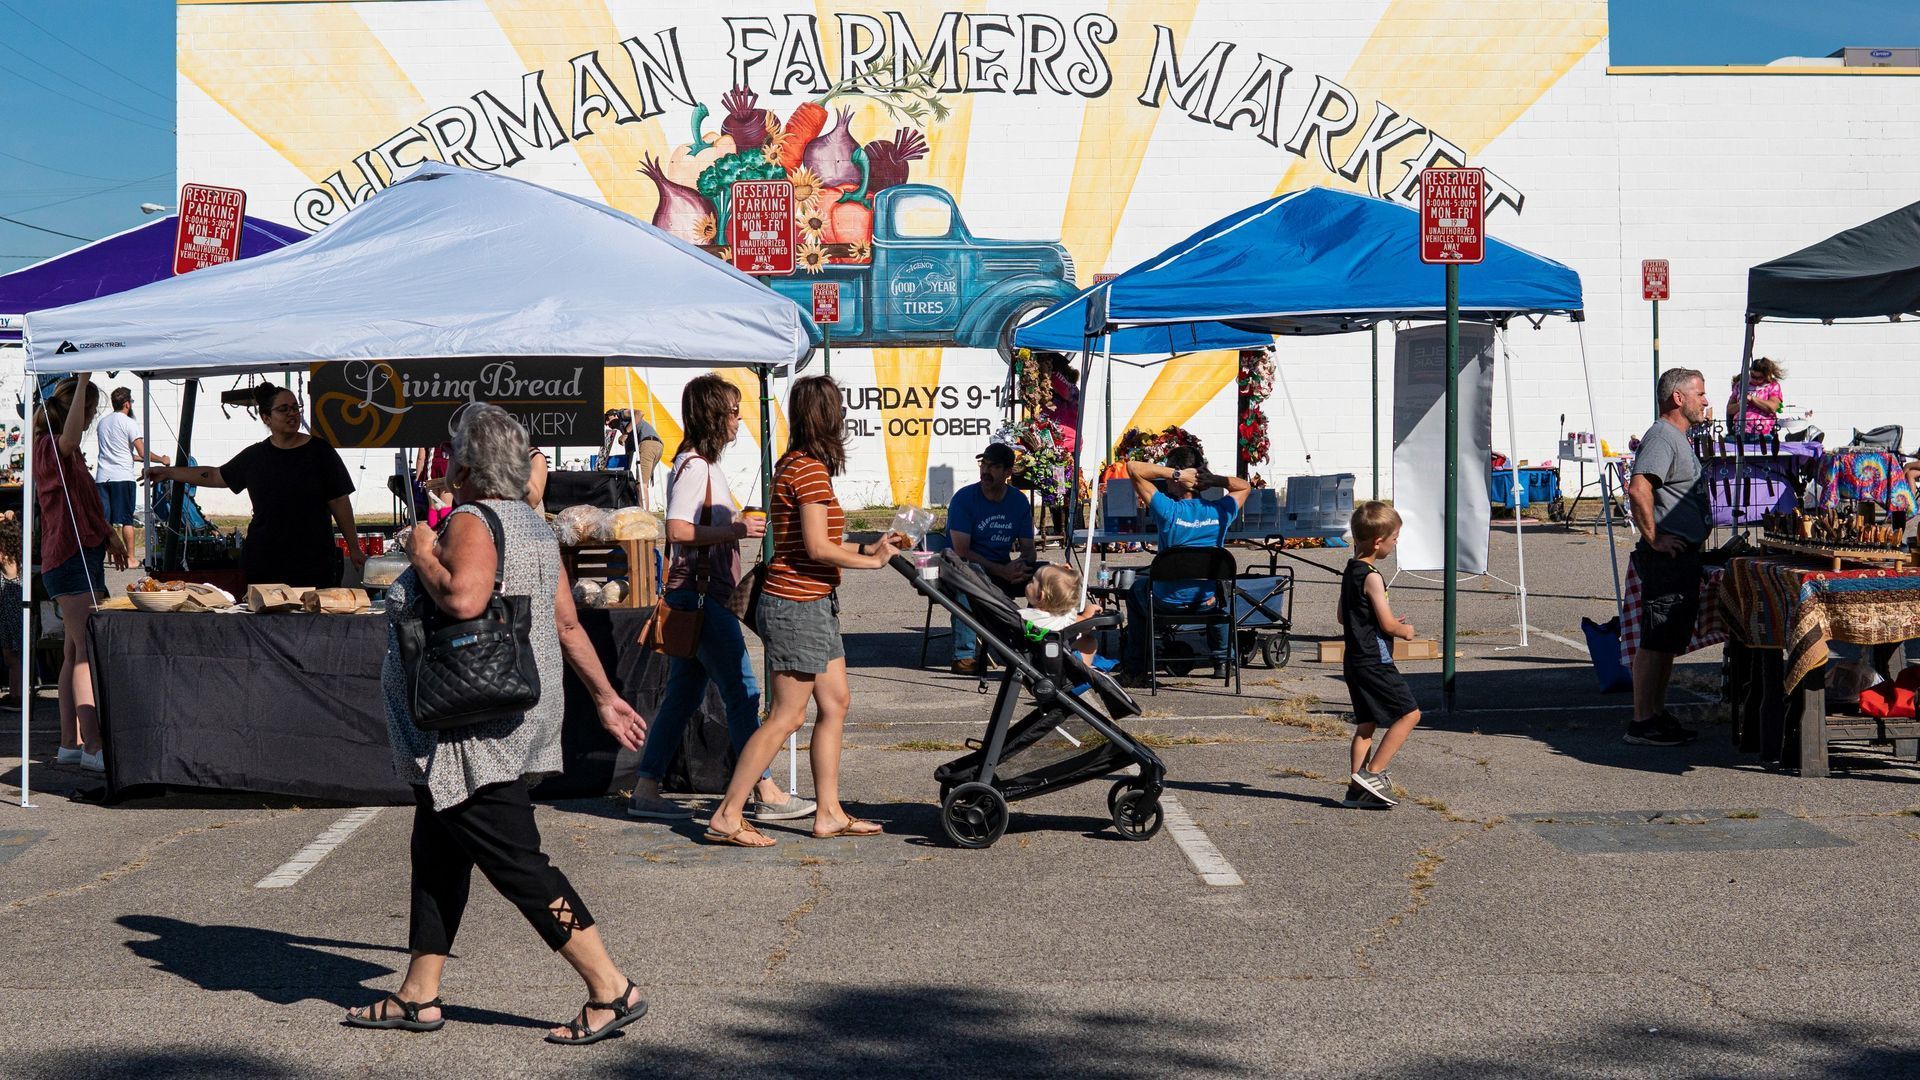 Sherman Farmers Market runs every Saturday from 9am - noon through the end of October. It is located on the corner of Crockett & Houston. One of the coolest things about the Sherman Farmers Market is that it is a producers only market! Come out and support local! #community